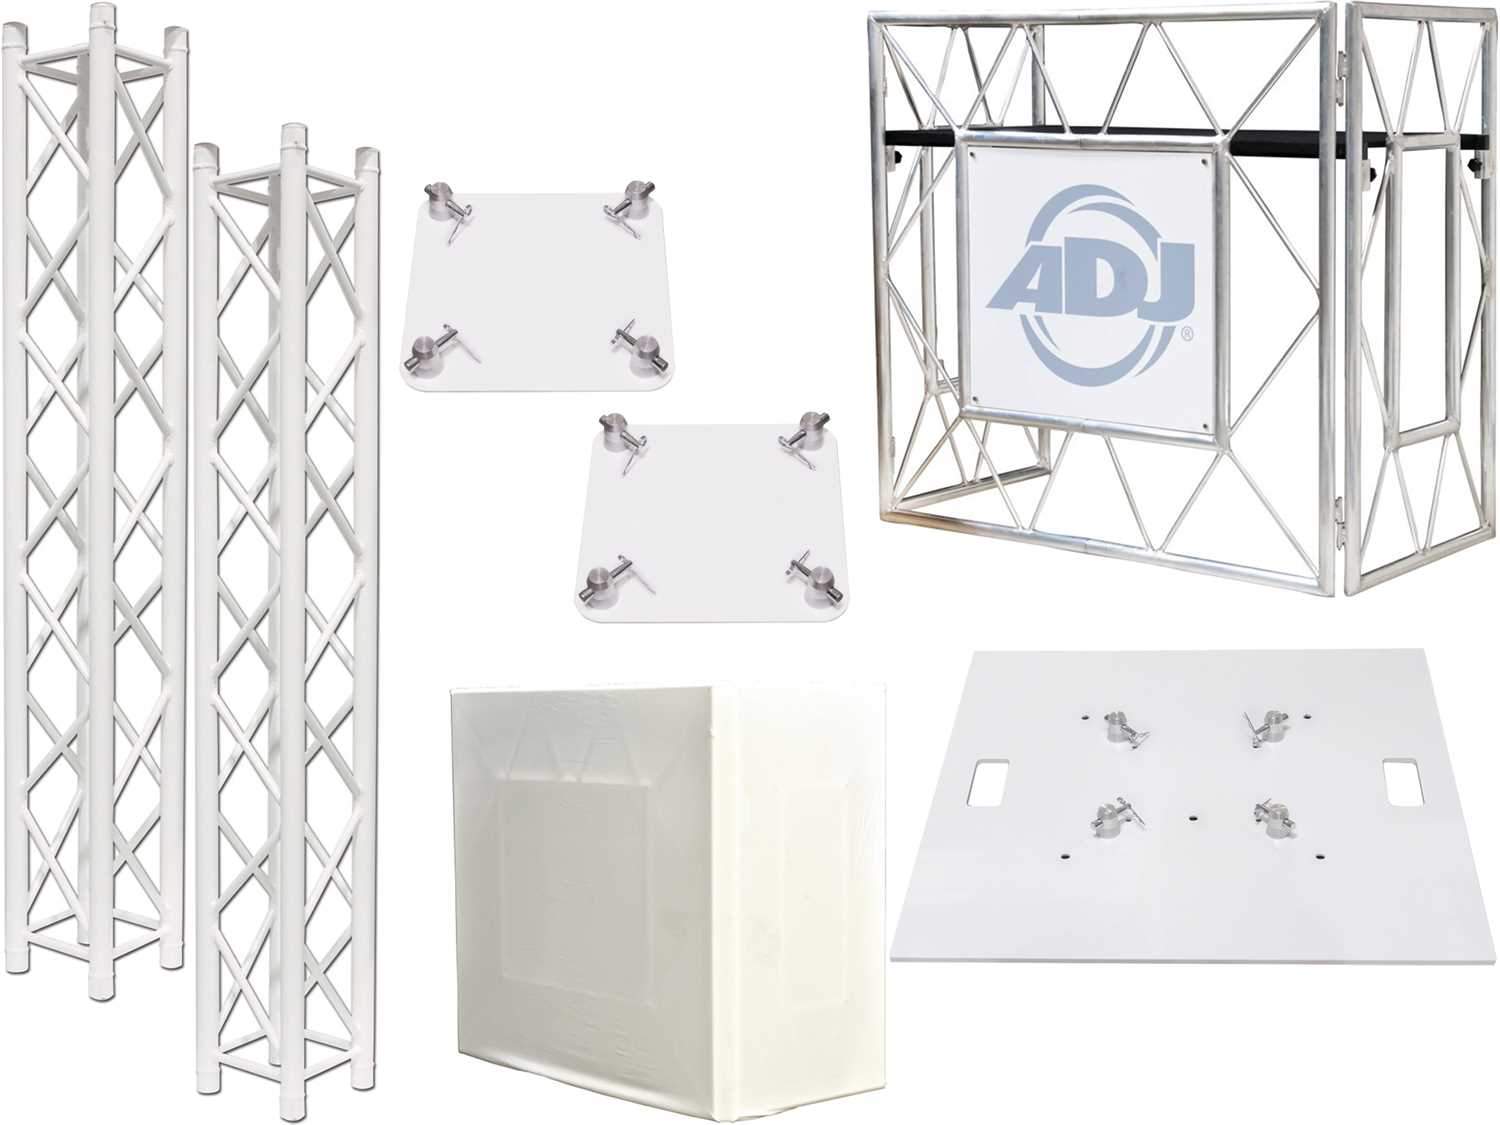 ADJ American DJ Pro Event Table with 8.20Ft White Truss Totems - ProSound and Stage Lighting